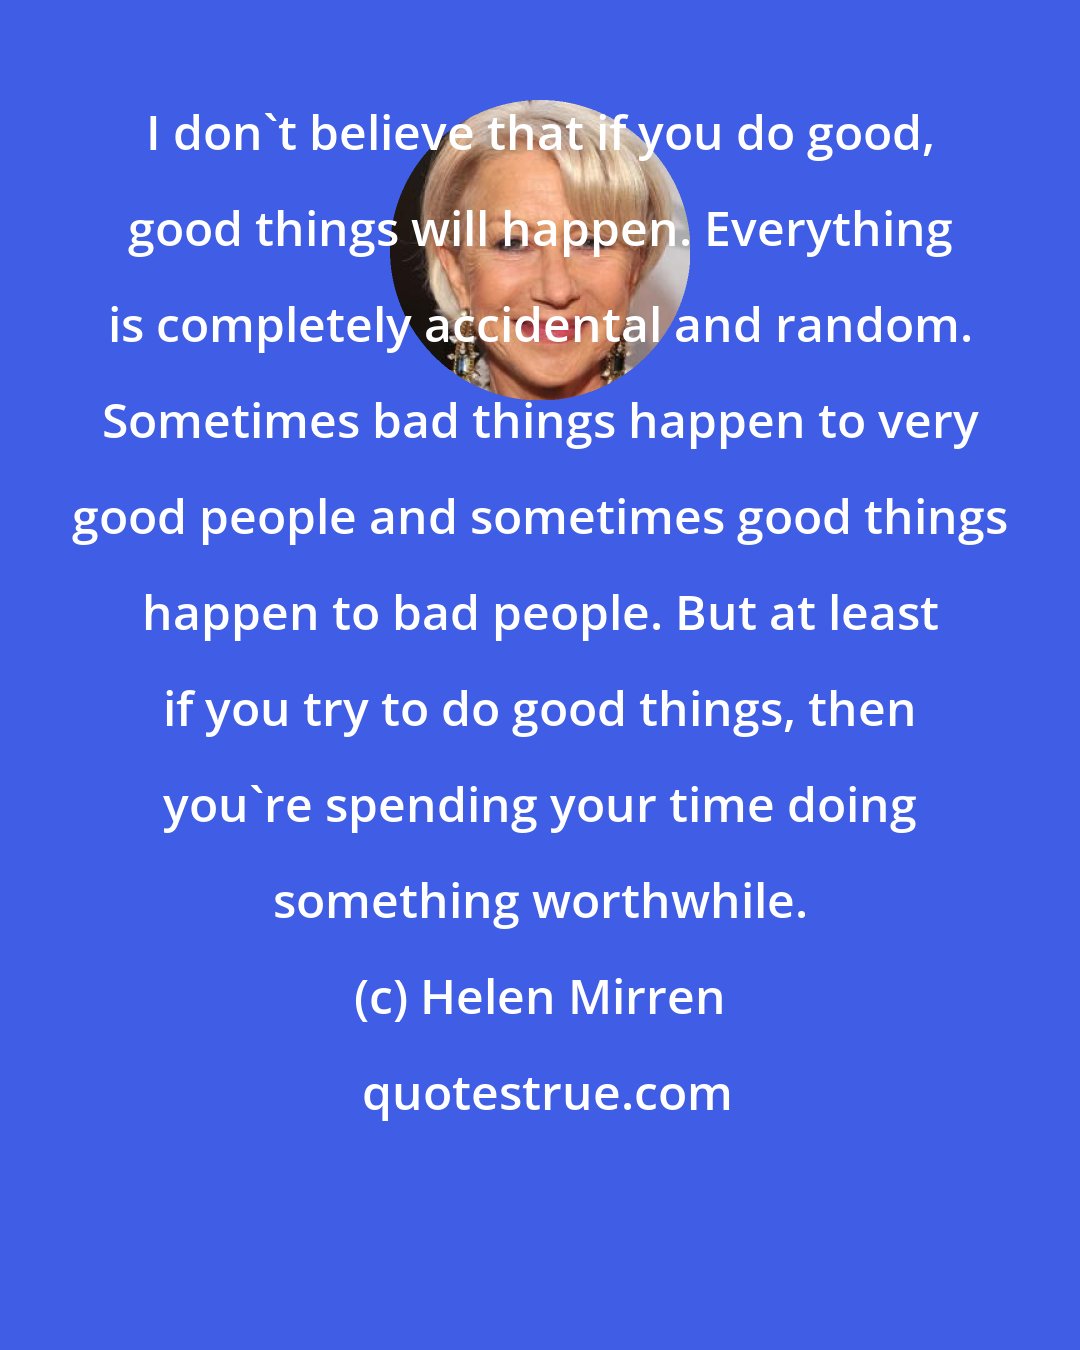 Helen Mirren: I don't believe that if you do good, good things will happen. Everything is completely accidental and random. Sometimes bad things happen to very good people and sometimes good things happen to bad people. But at least if you try to do good things, then you're spending your time doing something worthwhile.